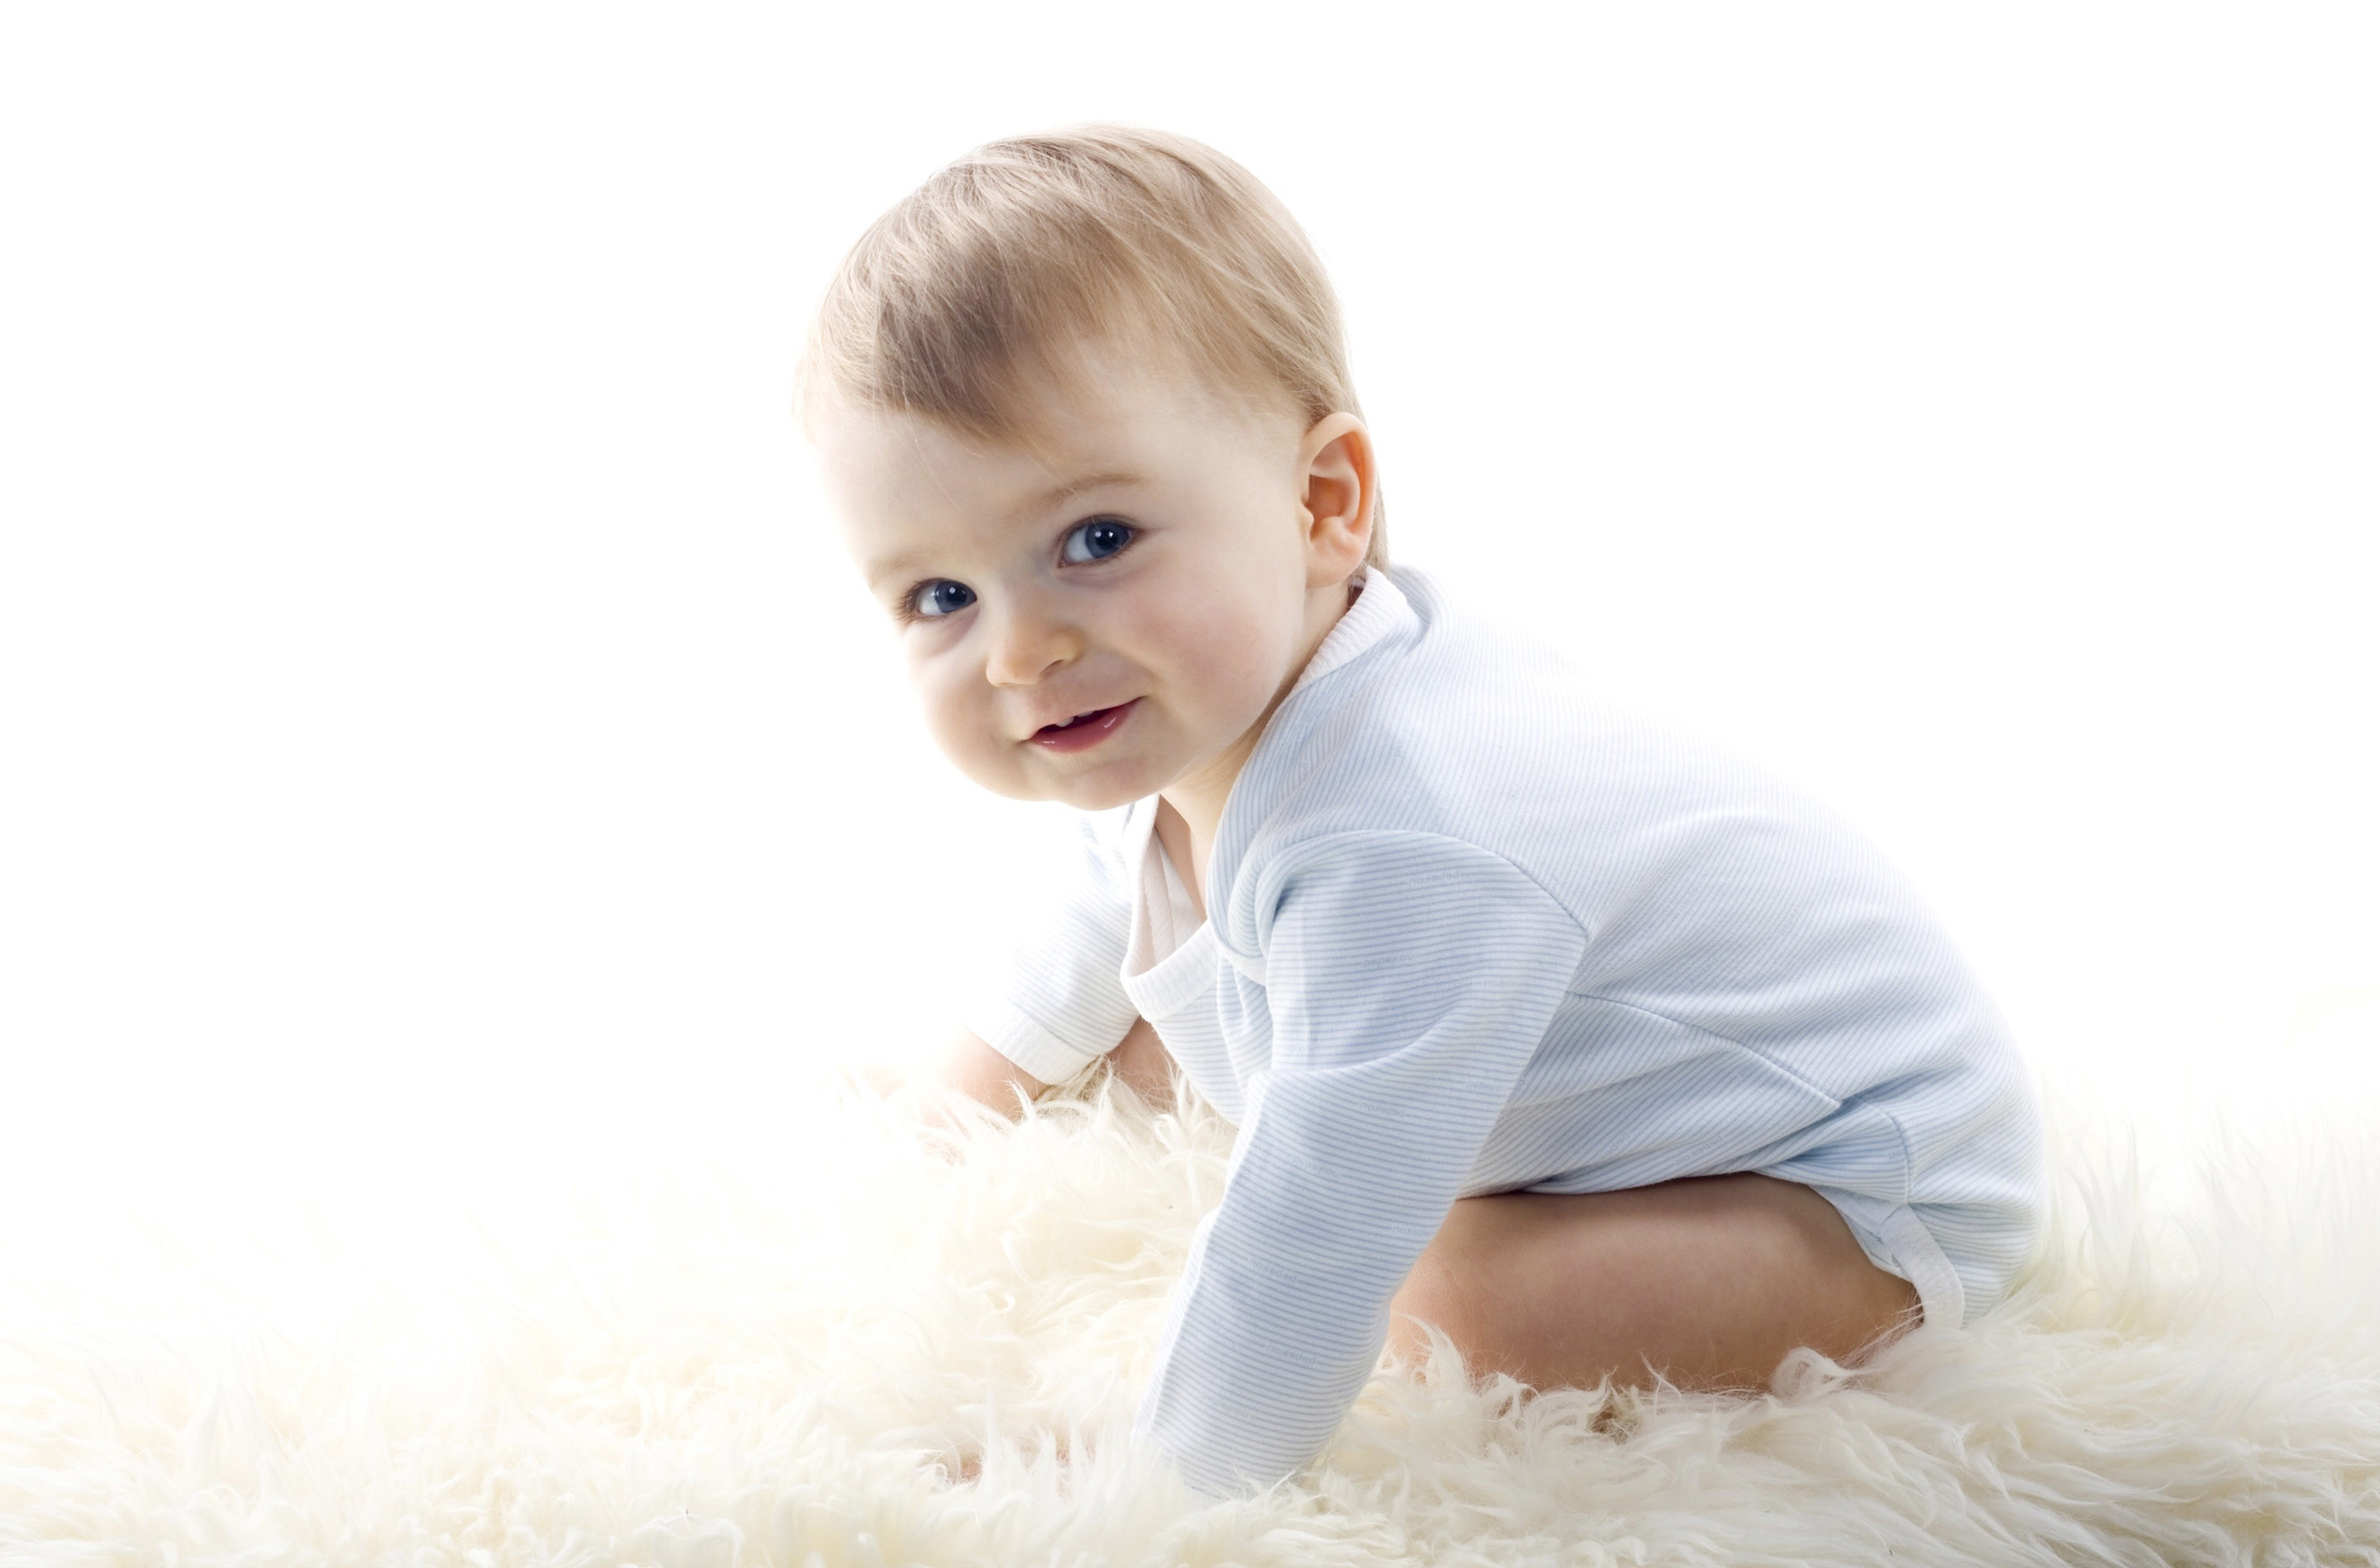 386207 Cute Baby Starring 4k - Rare Gallery HD Wallpapers